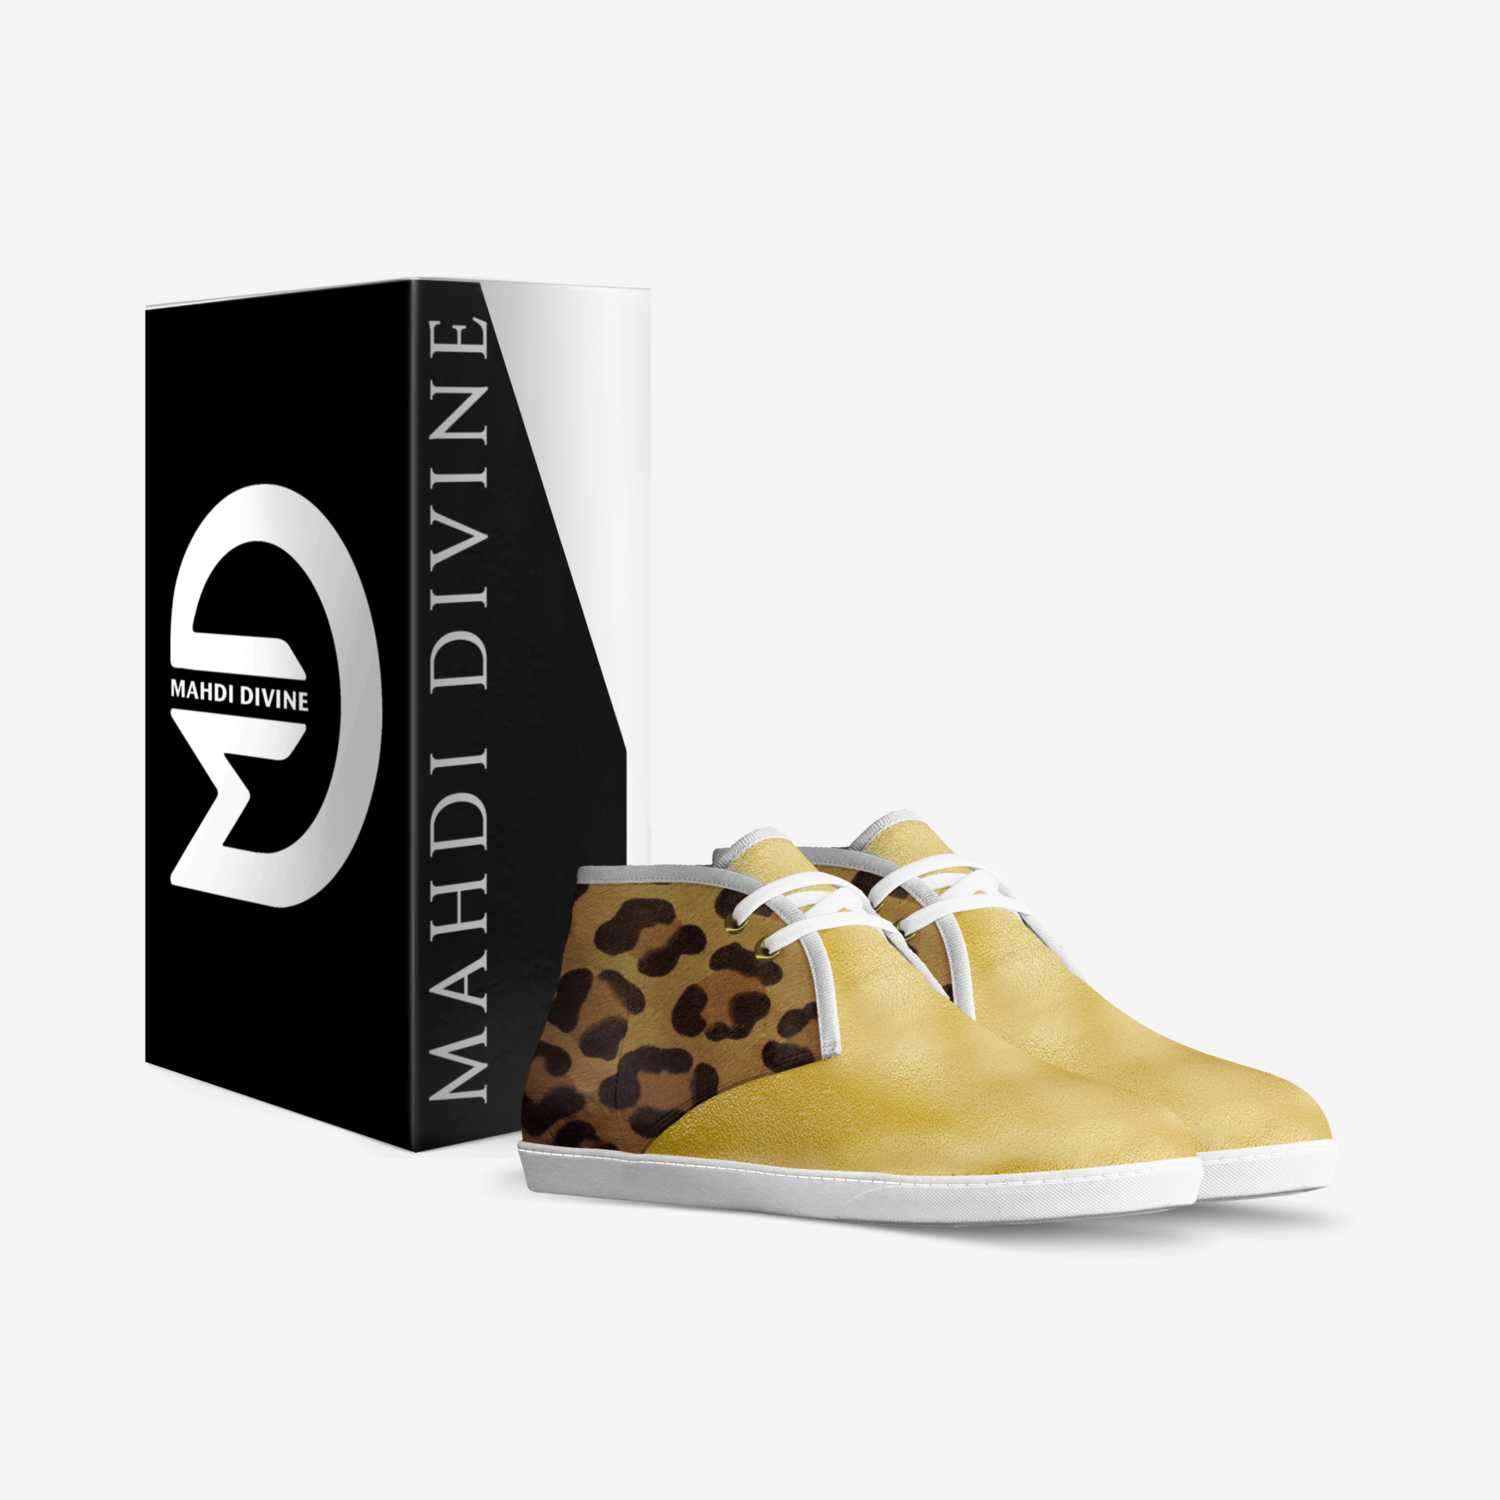 dune sands custom made in Italy shoes by Mahdi Divine | Box view